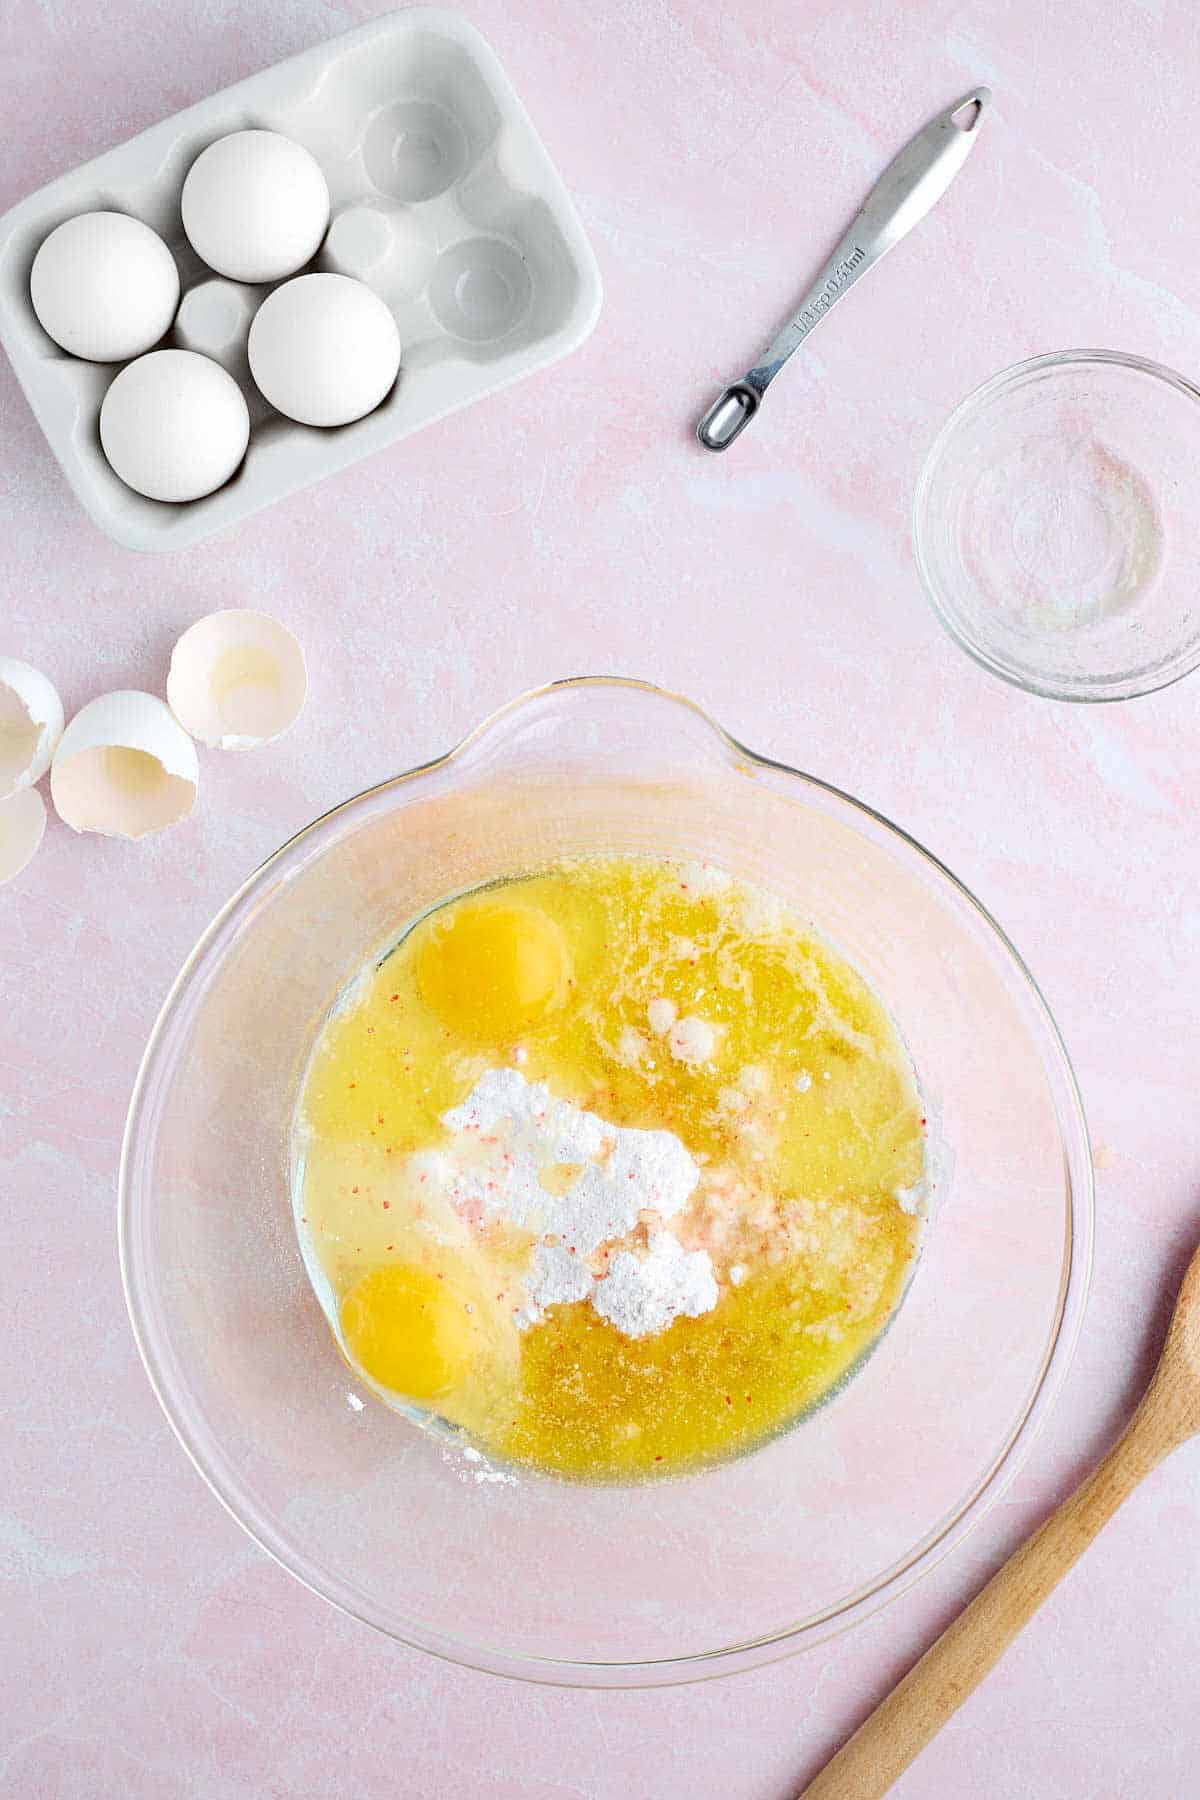 Cake mix, melted butter, eggs, and almond extract in a large mixing bowl.